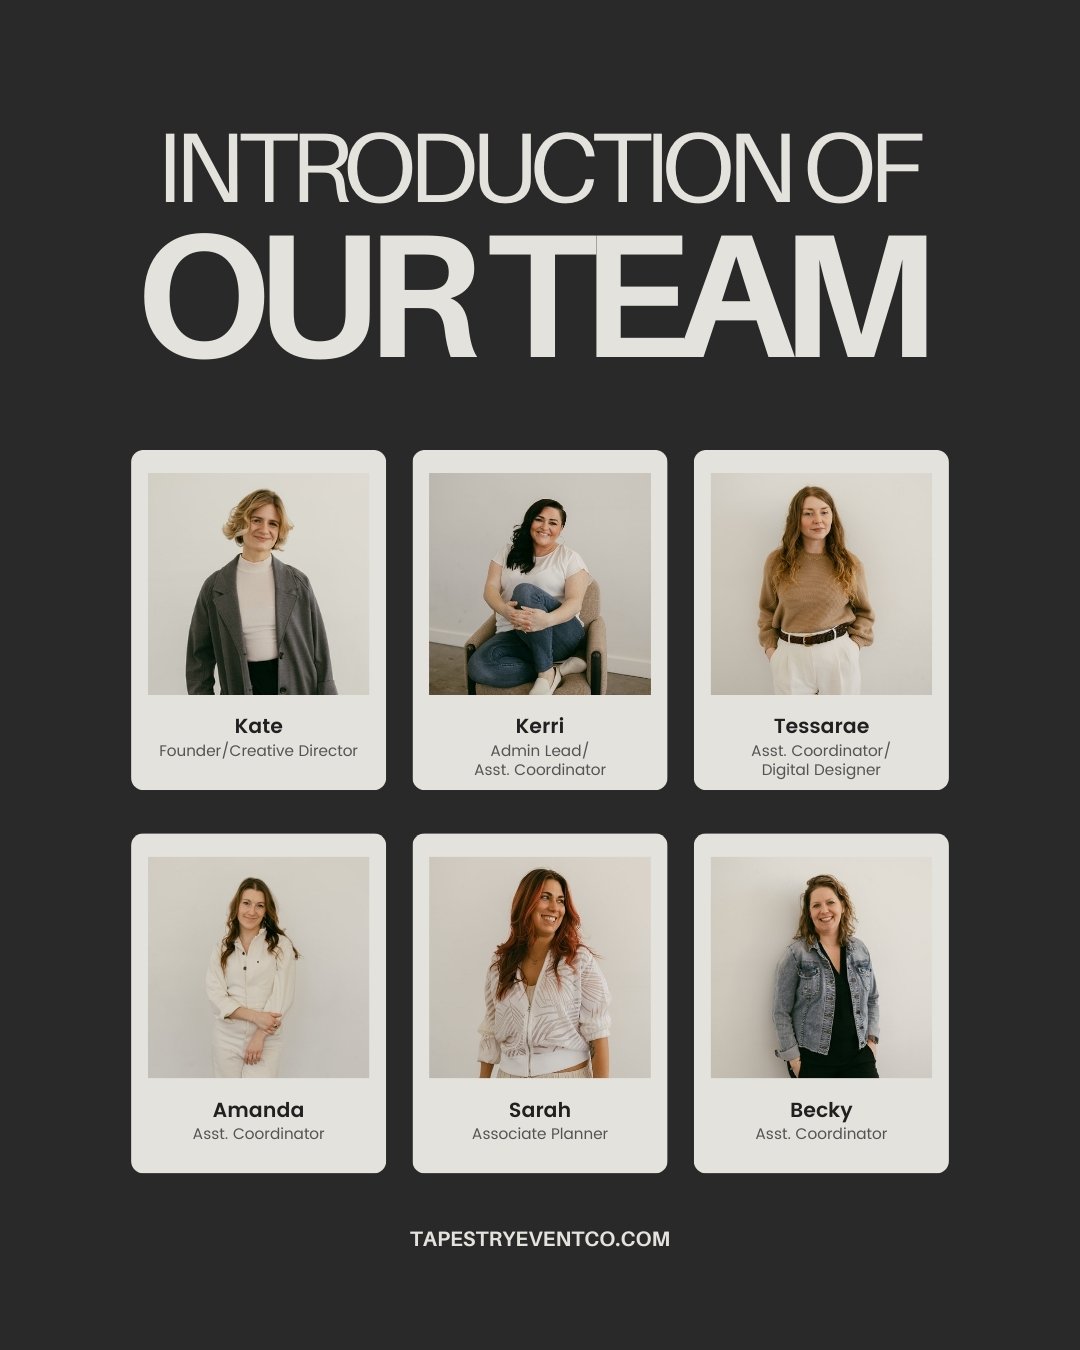 Meet our 2024 Tapestry Event Co. team! Every single one of our team members has been selected to give our clients the best possible experience from inquiry to wedding day and beyond. 

As the founder, I value each of these people so much for being pa